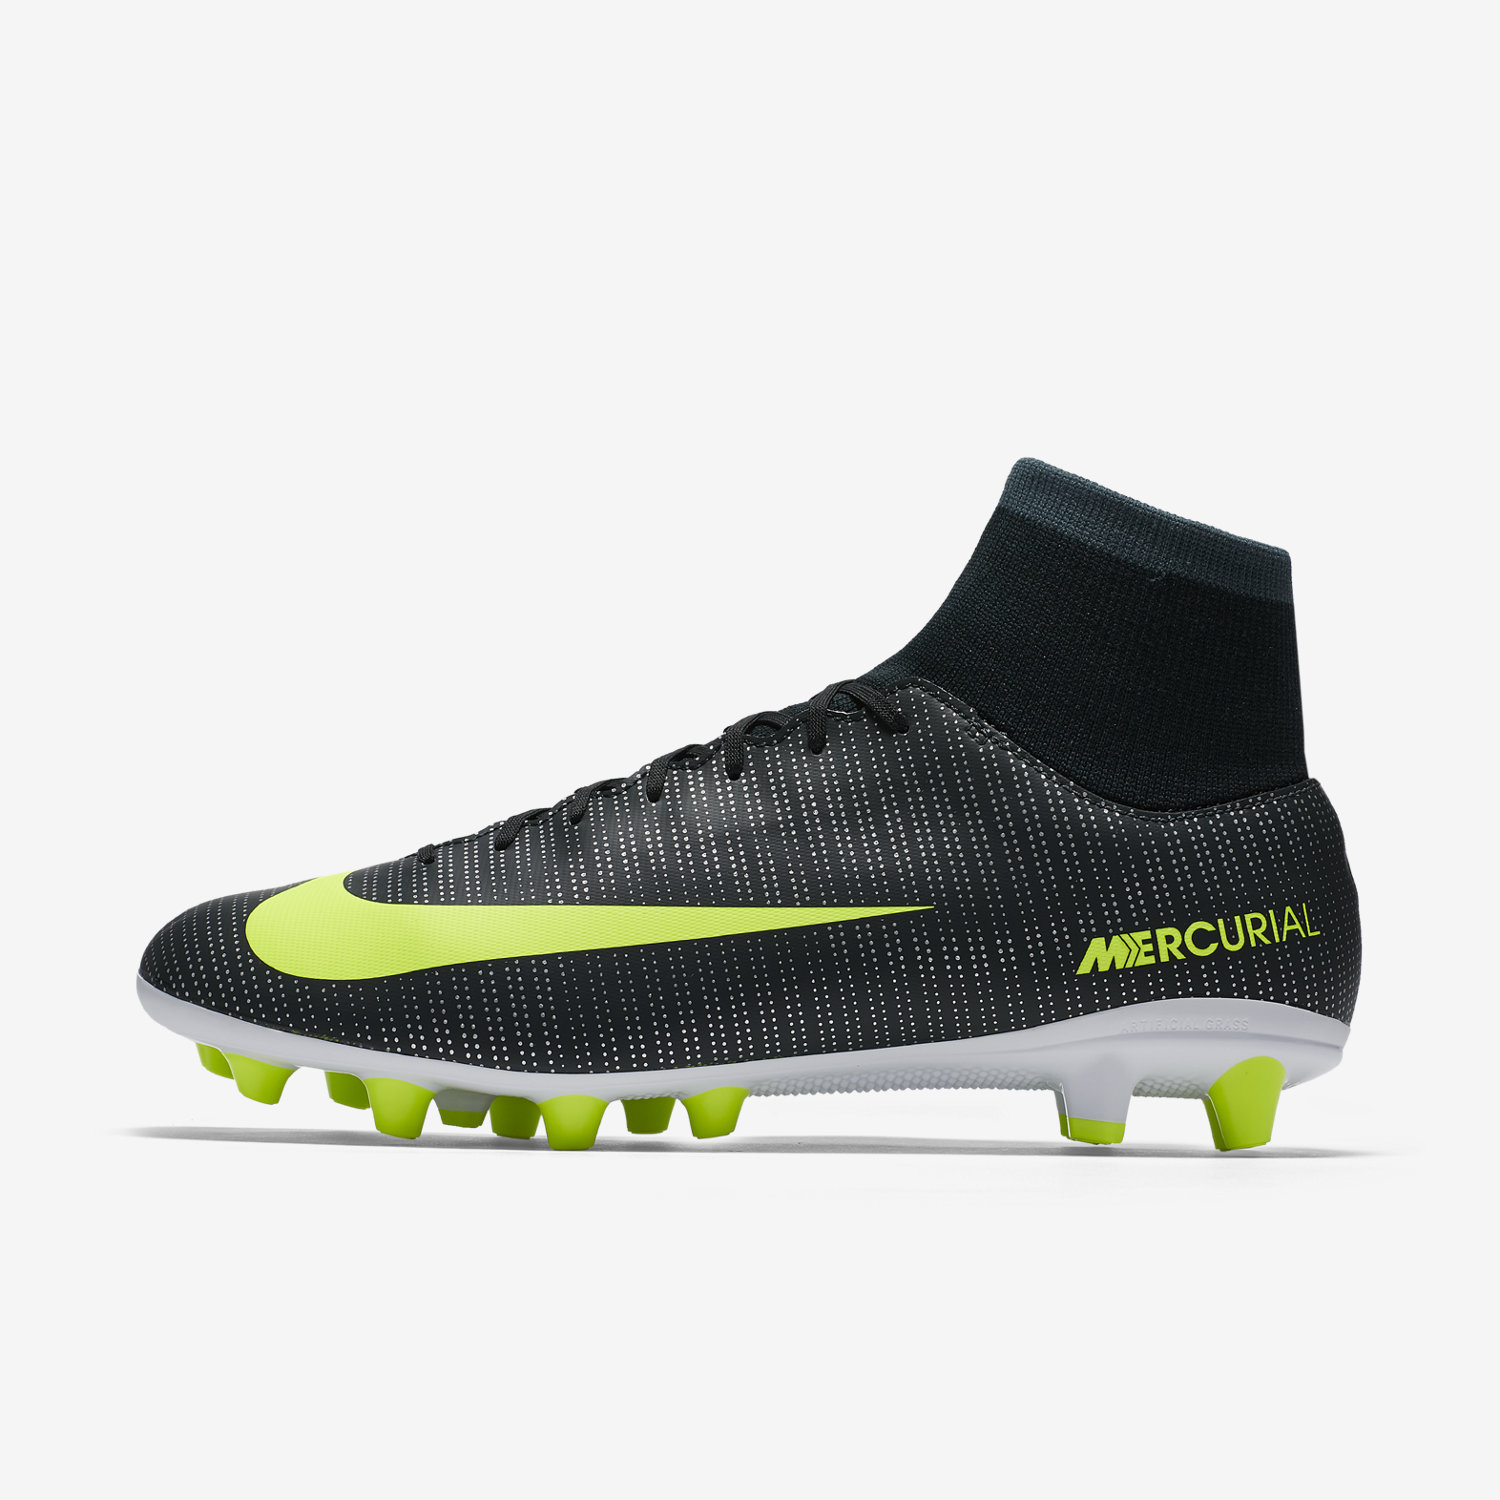 Nike Mercurial Victory VI Dynamic Fit CR7 AG-PRO - Men's Artificial-Grass Football Boot